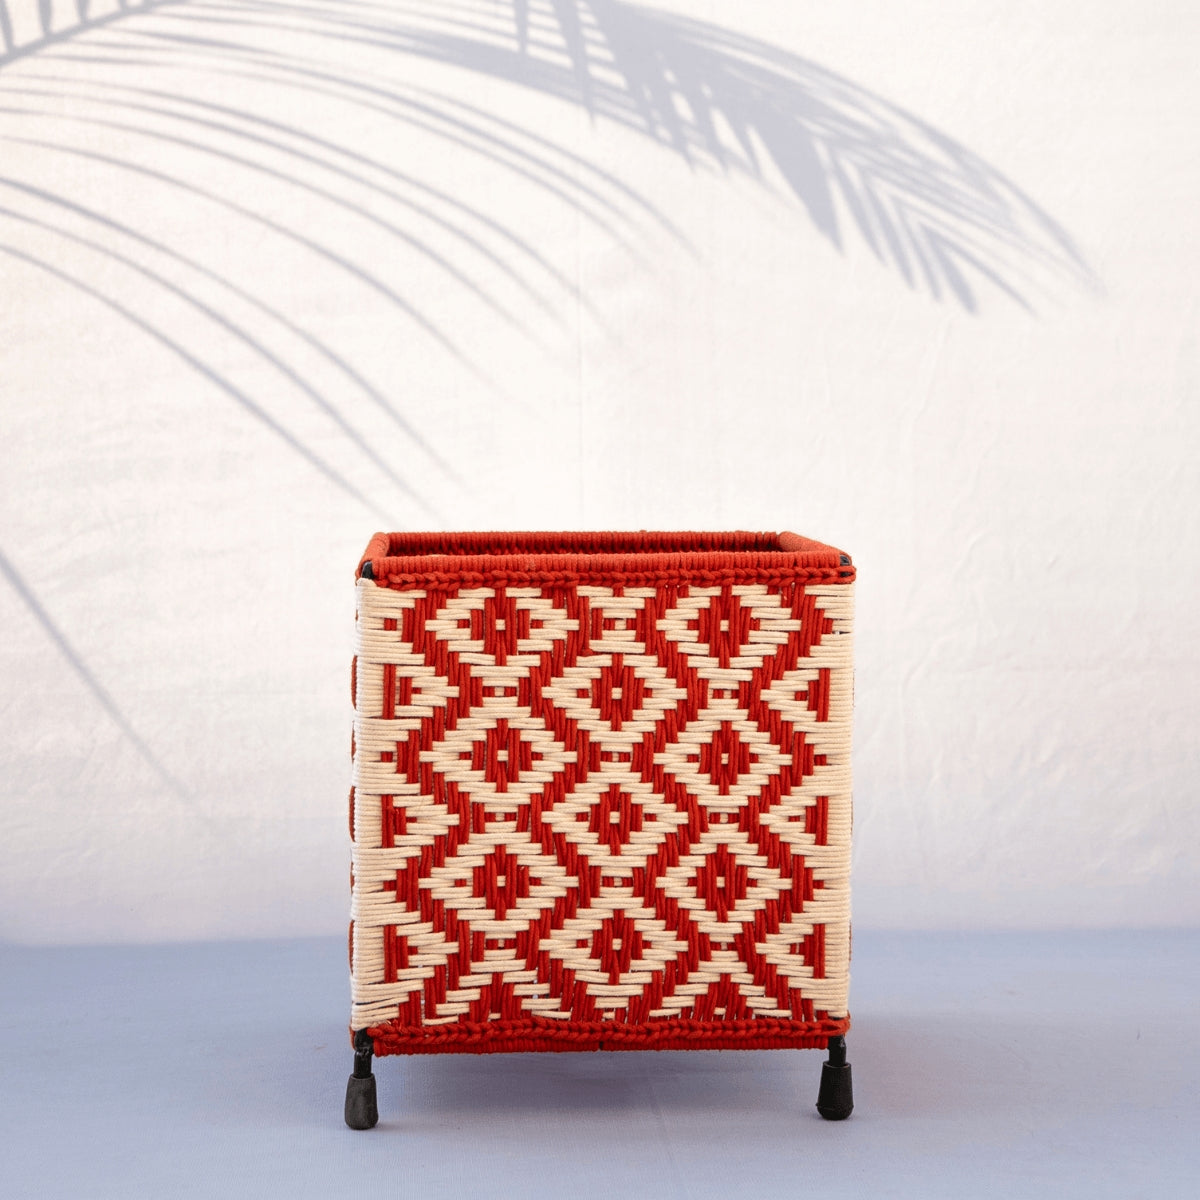 Tudor Cotton Square Planters - Sirohi.org - Colour_Red, Colour_White, Purpose_Home Accessory, Rope Material_Recycled Cotton